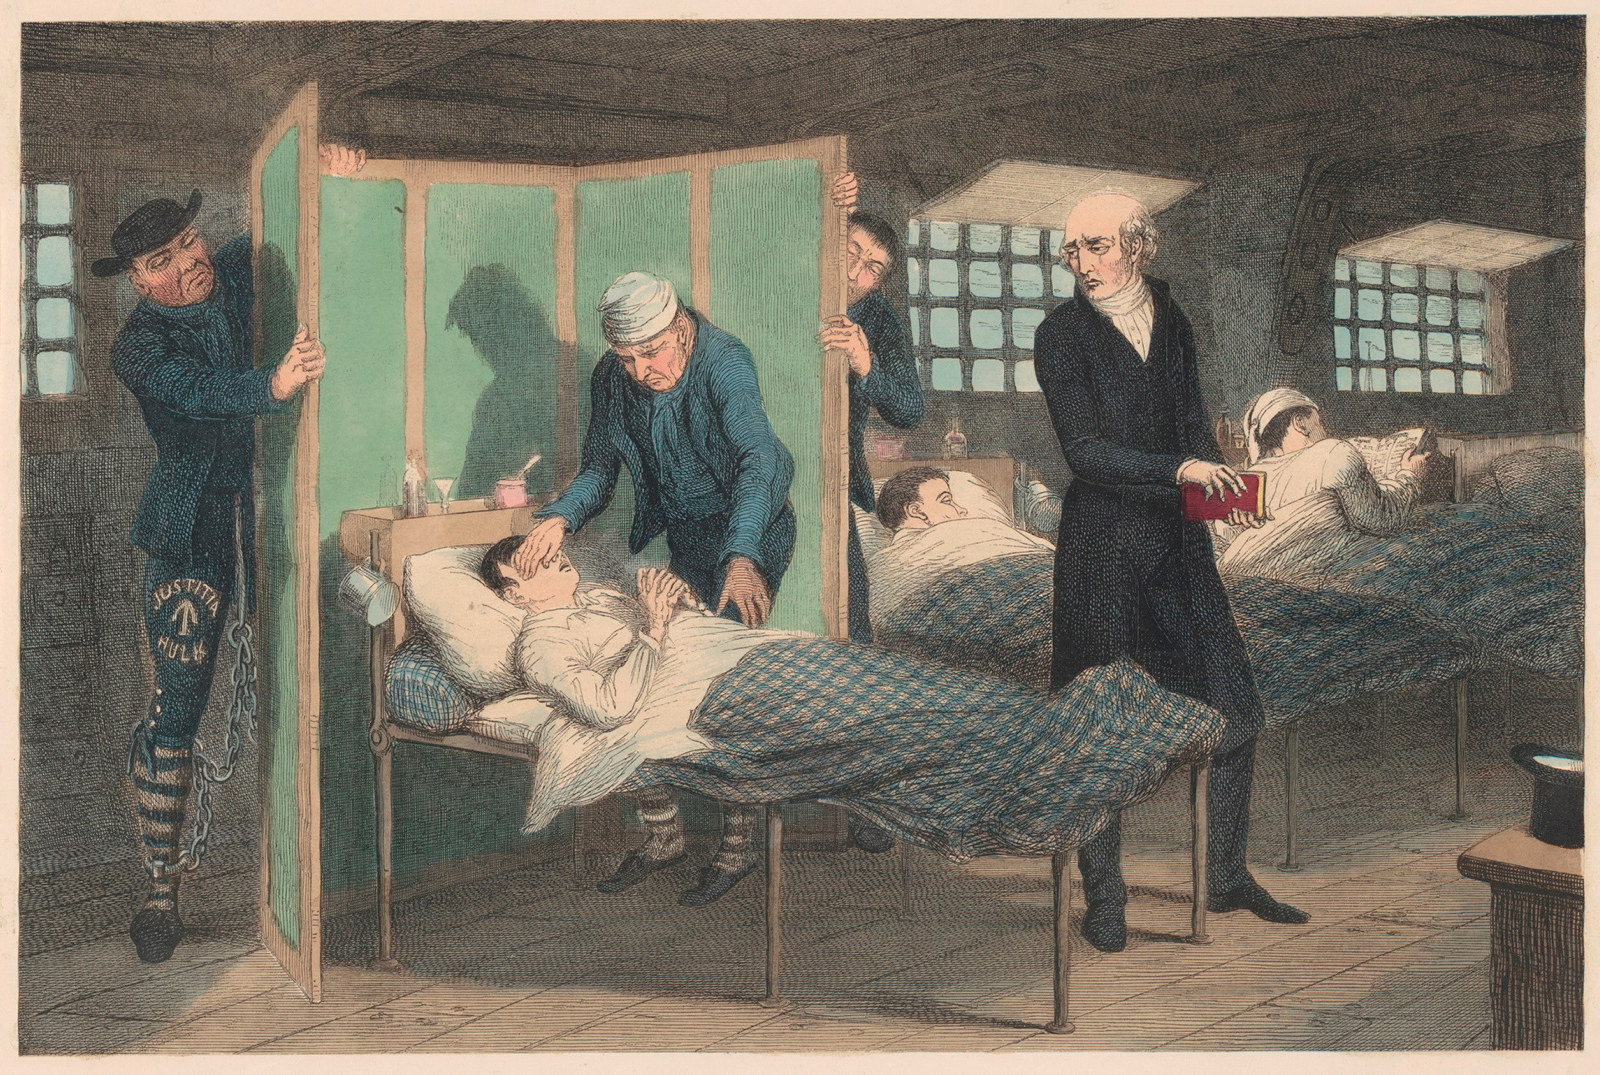 Hand coloured engraving of various convicts within wooden cabin